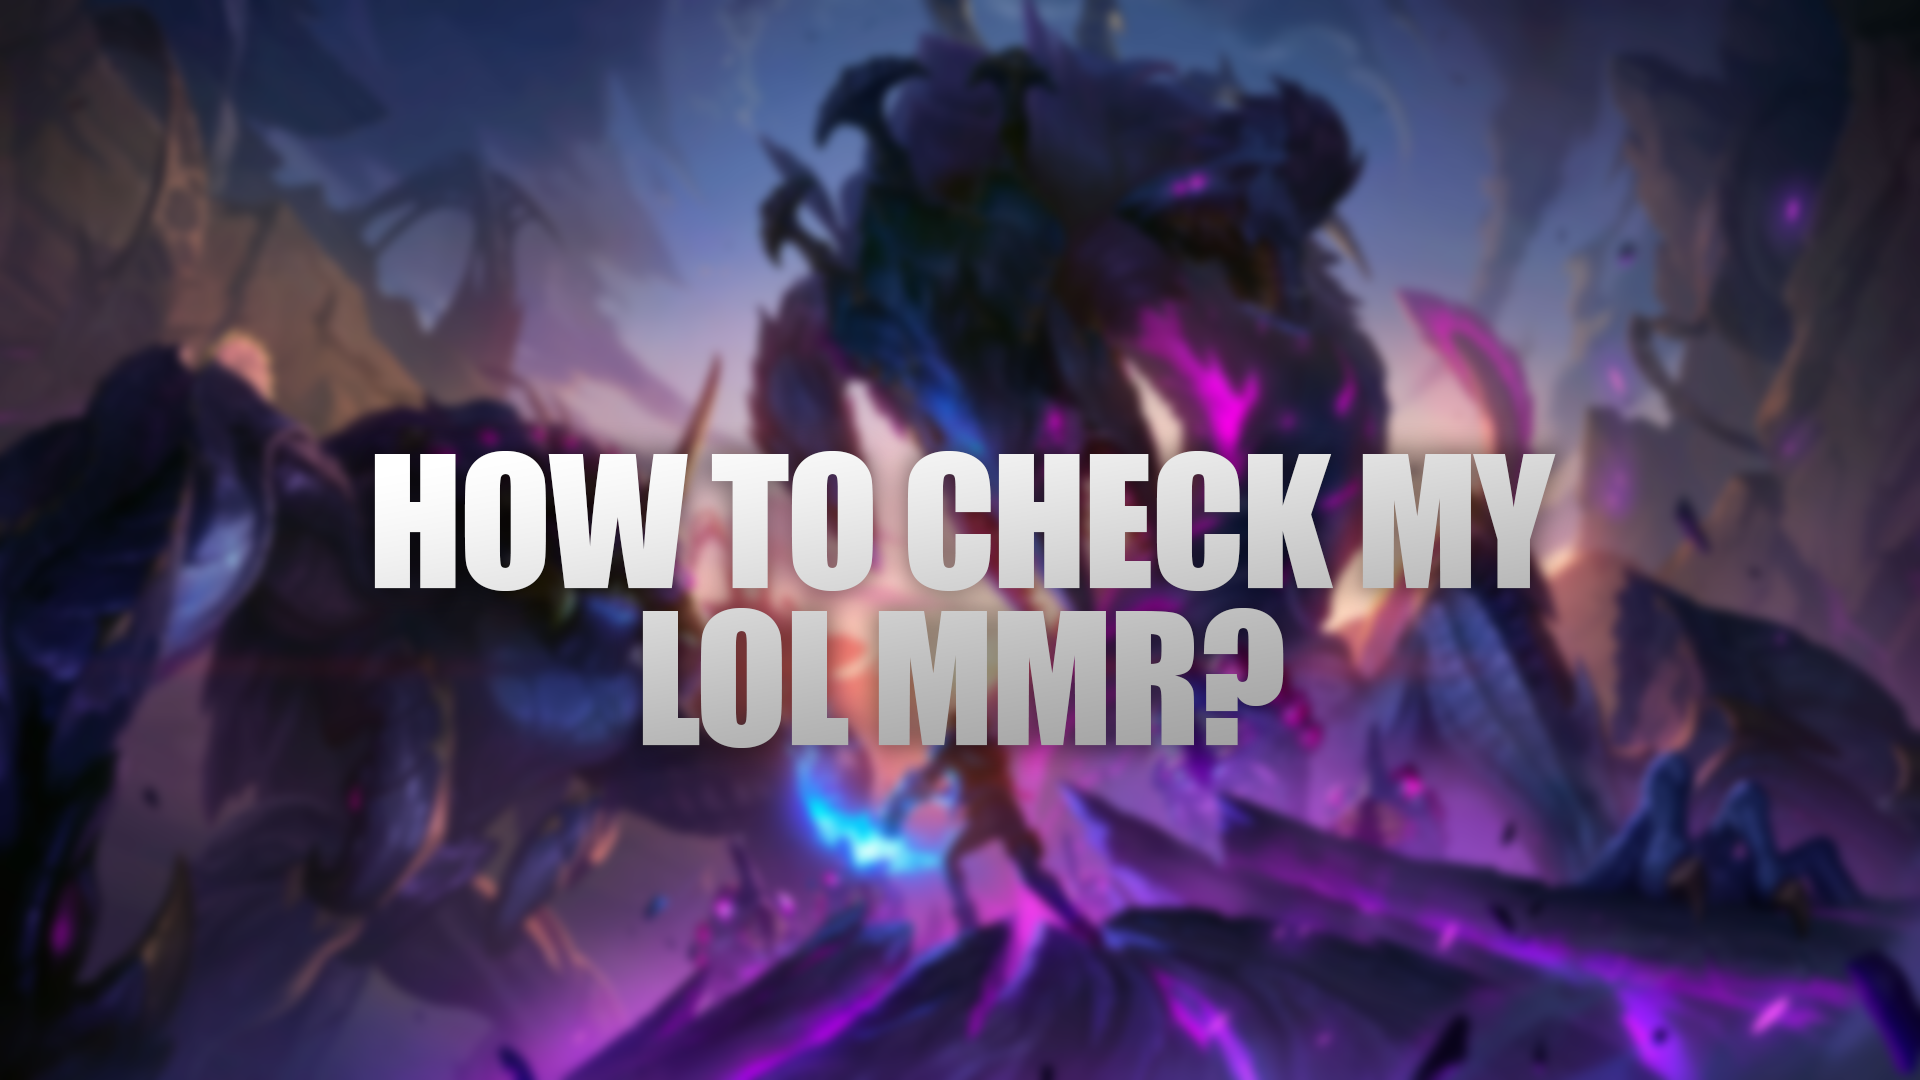 Since Riot keeps MMR hidden, players have to rely on third-party MMR checker tools. Sites like MyLoLMMR and WhatIsMyMMR use special algorithms and collected data to provide educated guesses on players' MMRs.